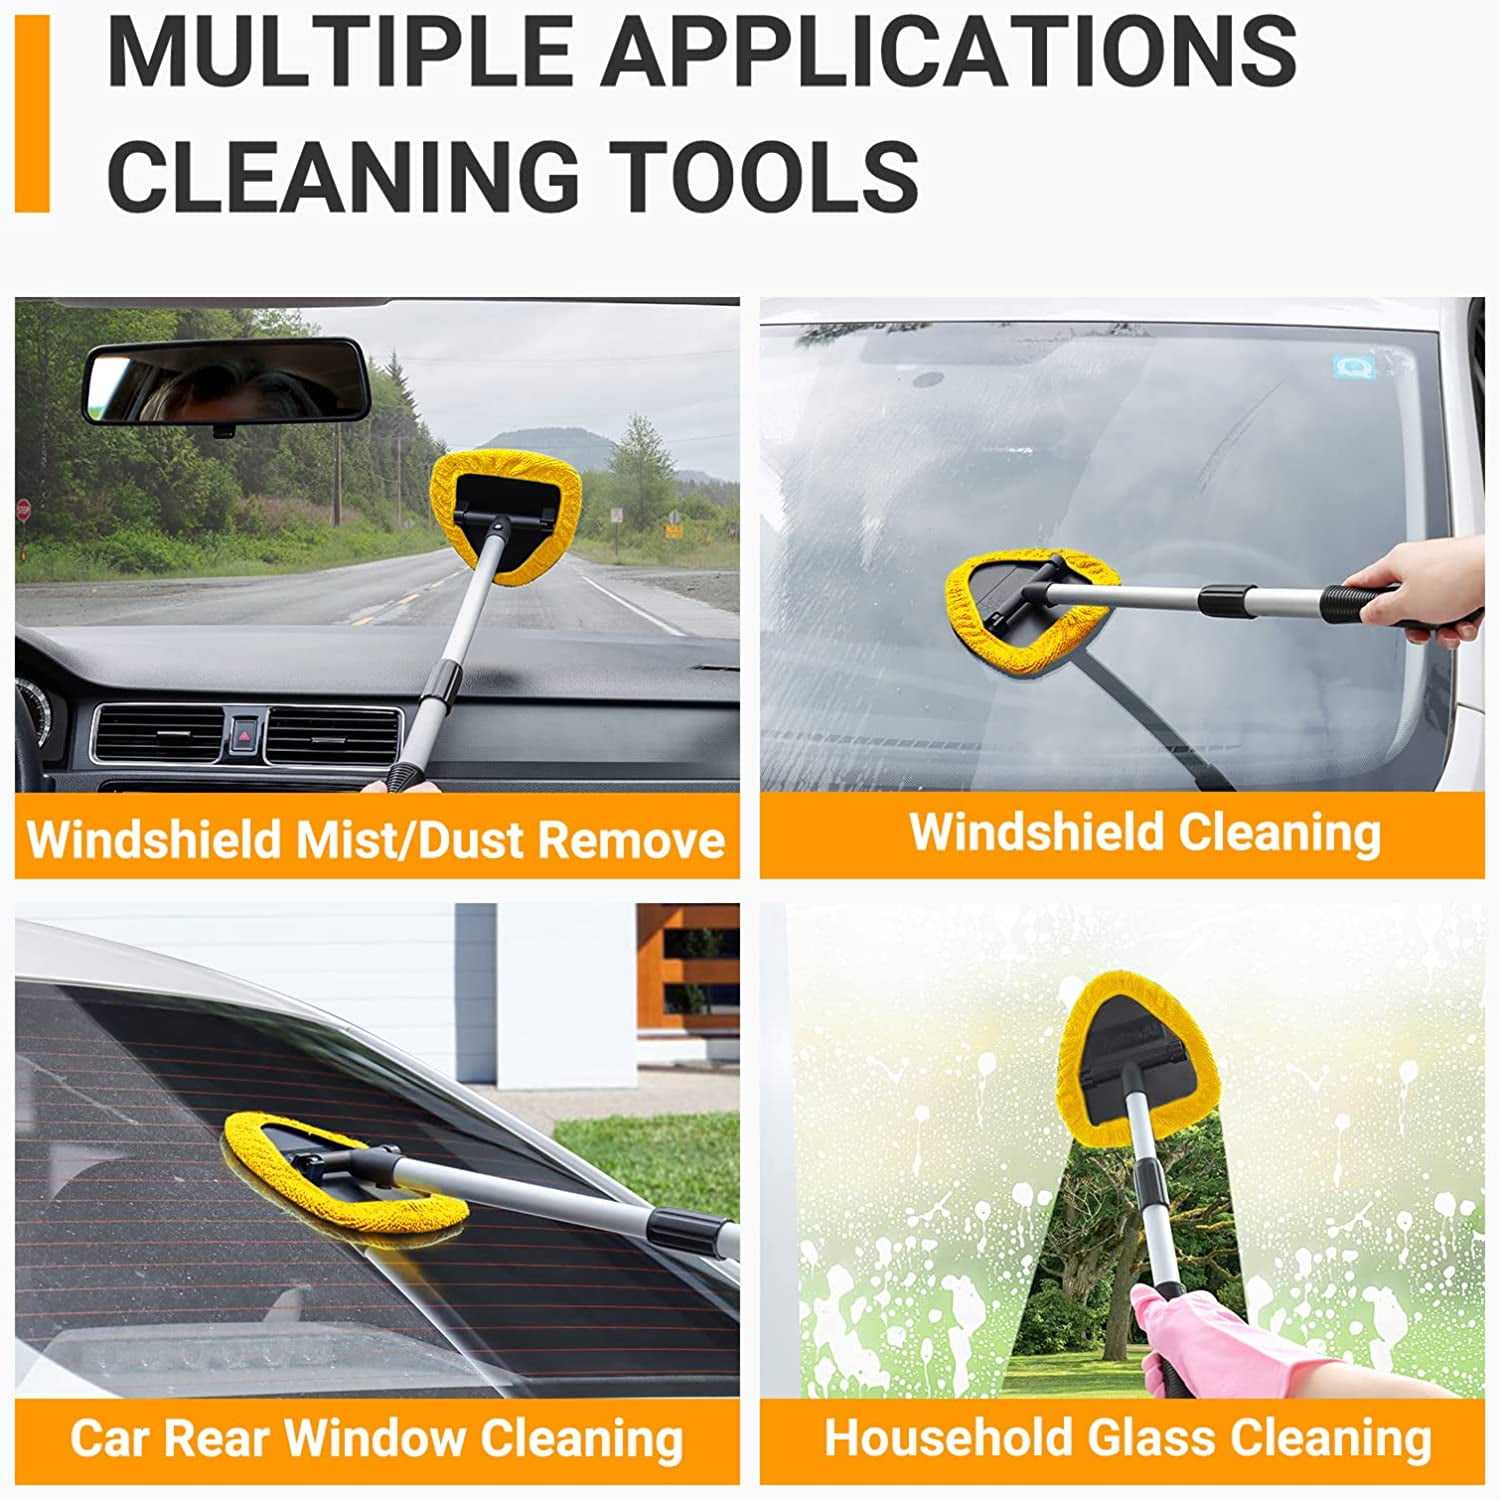  Sowist Car Windshield Cleaner Wand Cleaning Kit Interior,Car  Window Cleaning Tools for Wiper Fluid and Defogging,Invisible Glass Cleaner  Automotive Tools : Automotive